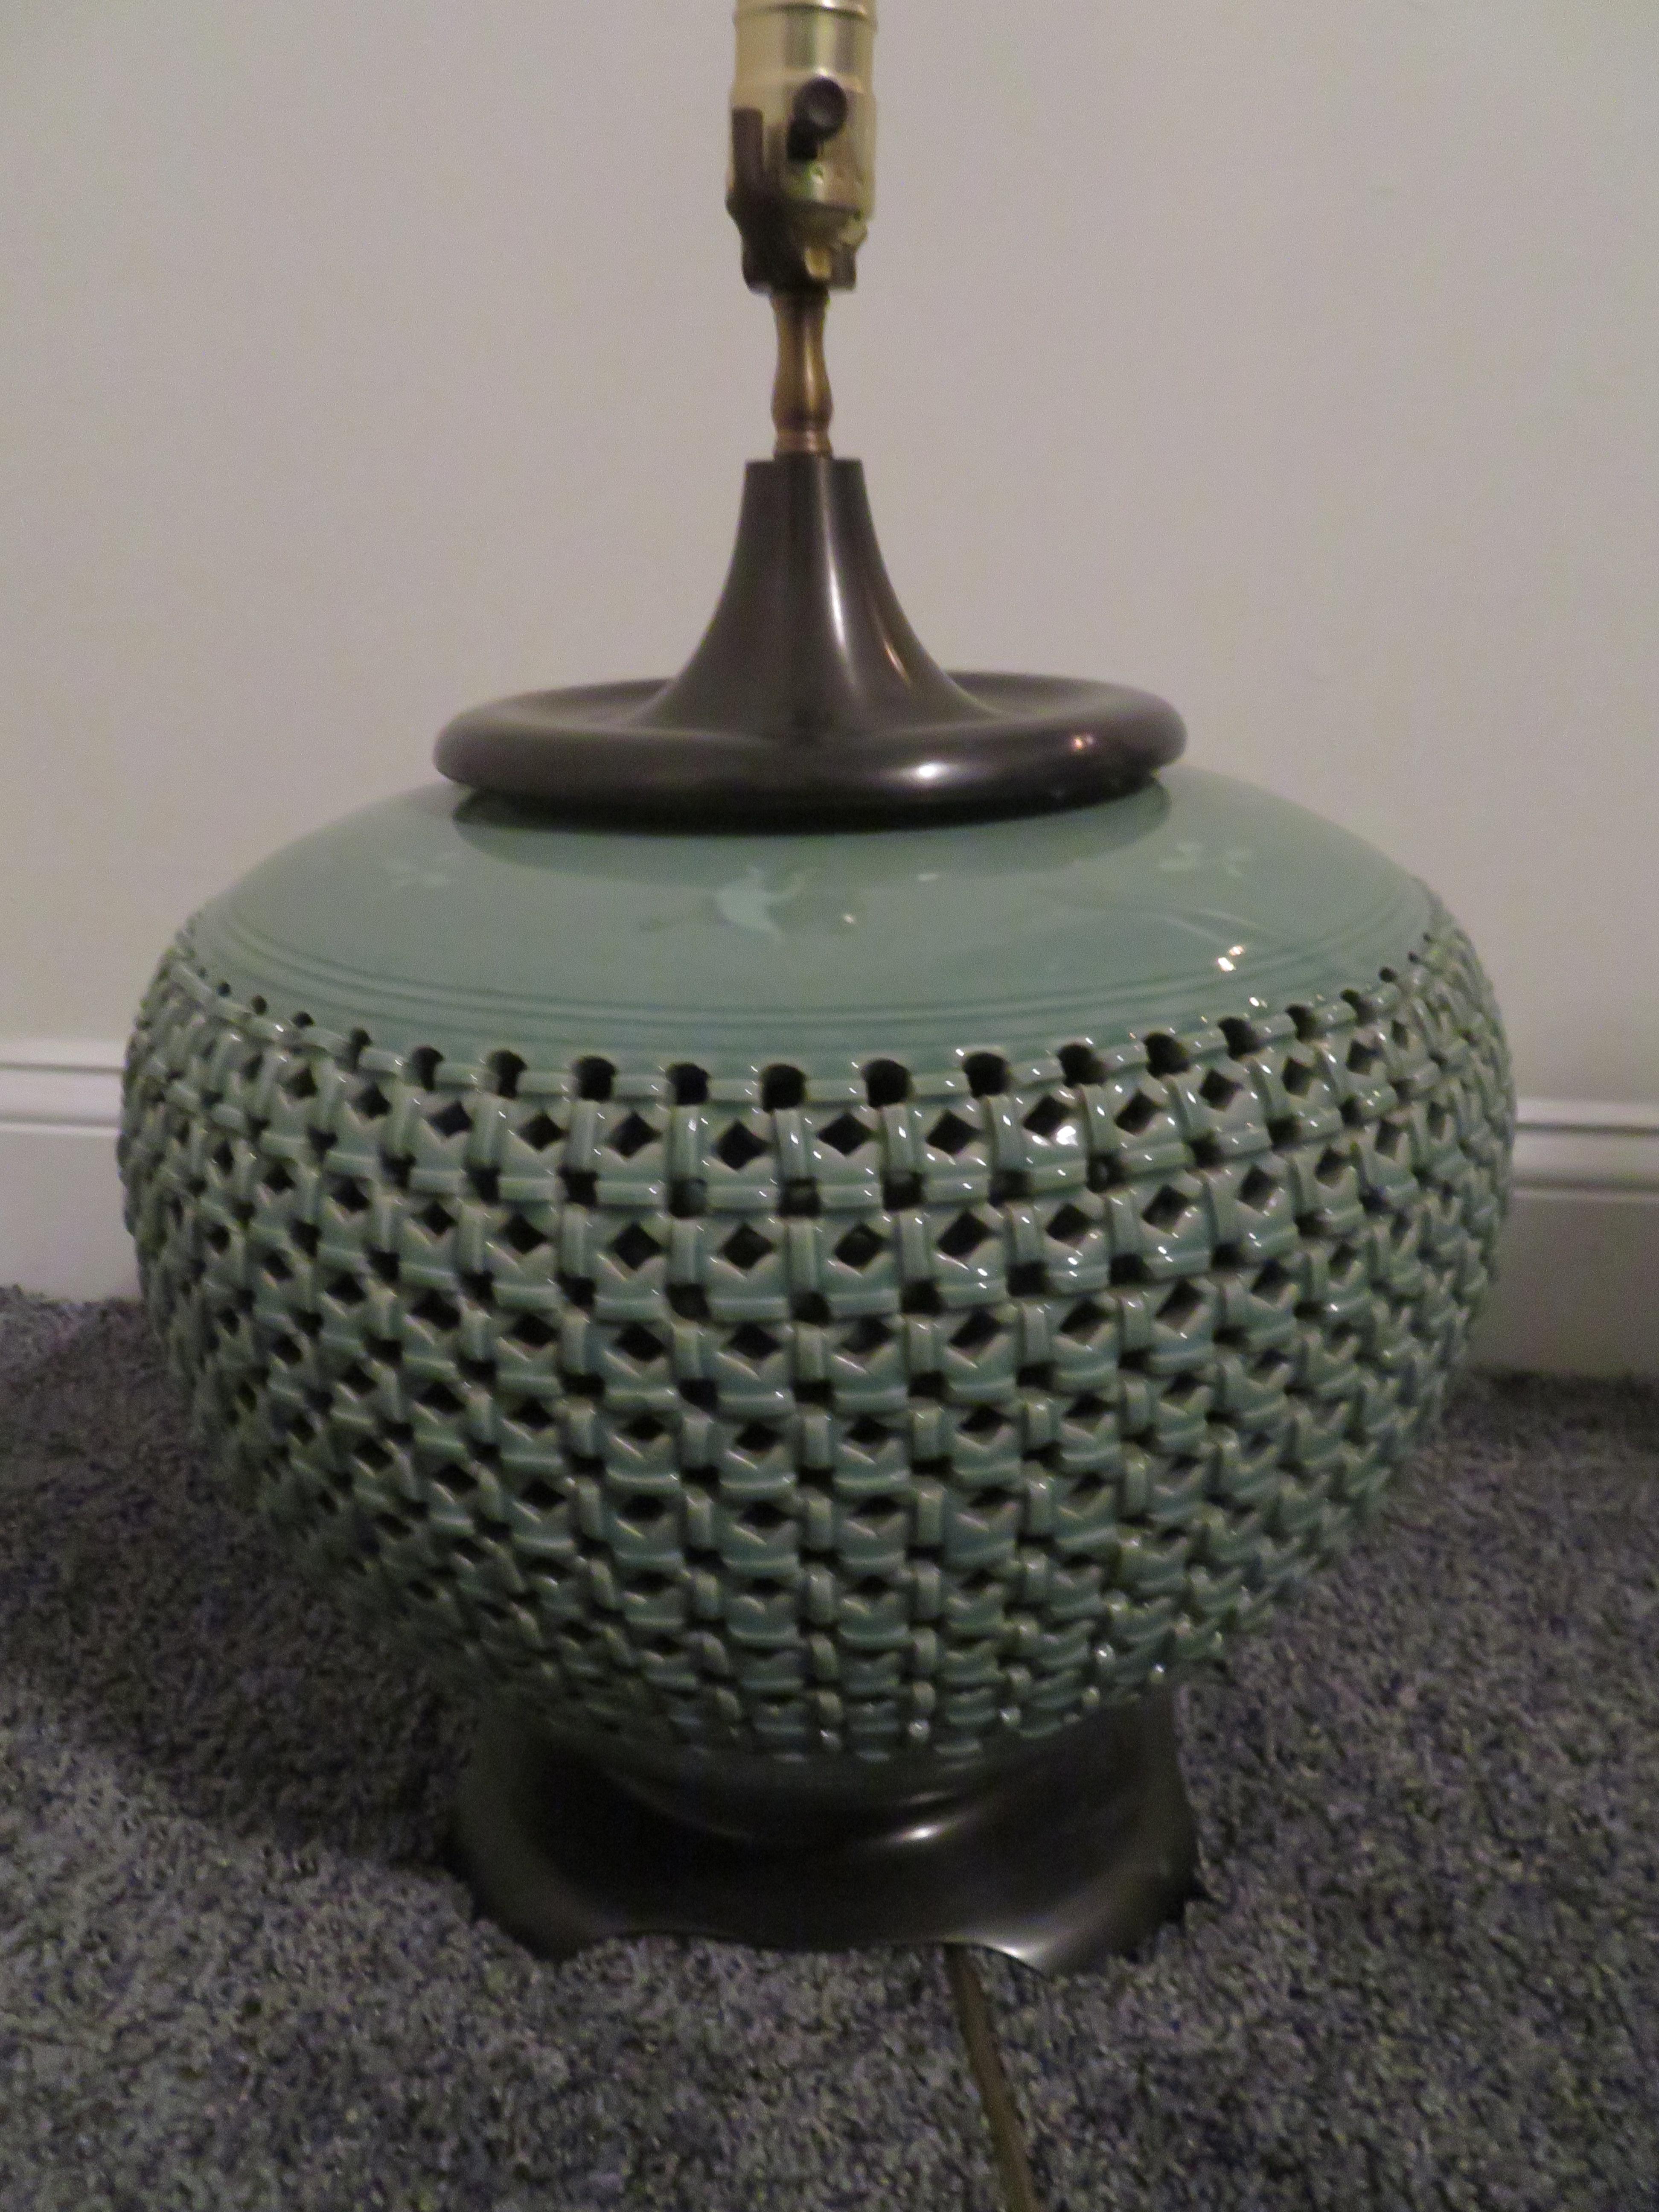 Gorgeous extra large celadon green ceramic lamp with wonderful lattice style pierced work and crackled finish to top and bottom. There are also some very light incised cranes under the crackled finish on the top half-just lovely. This lamp measures